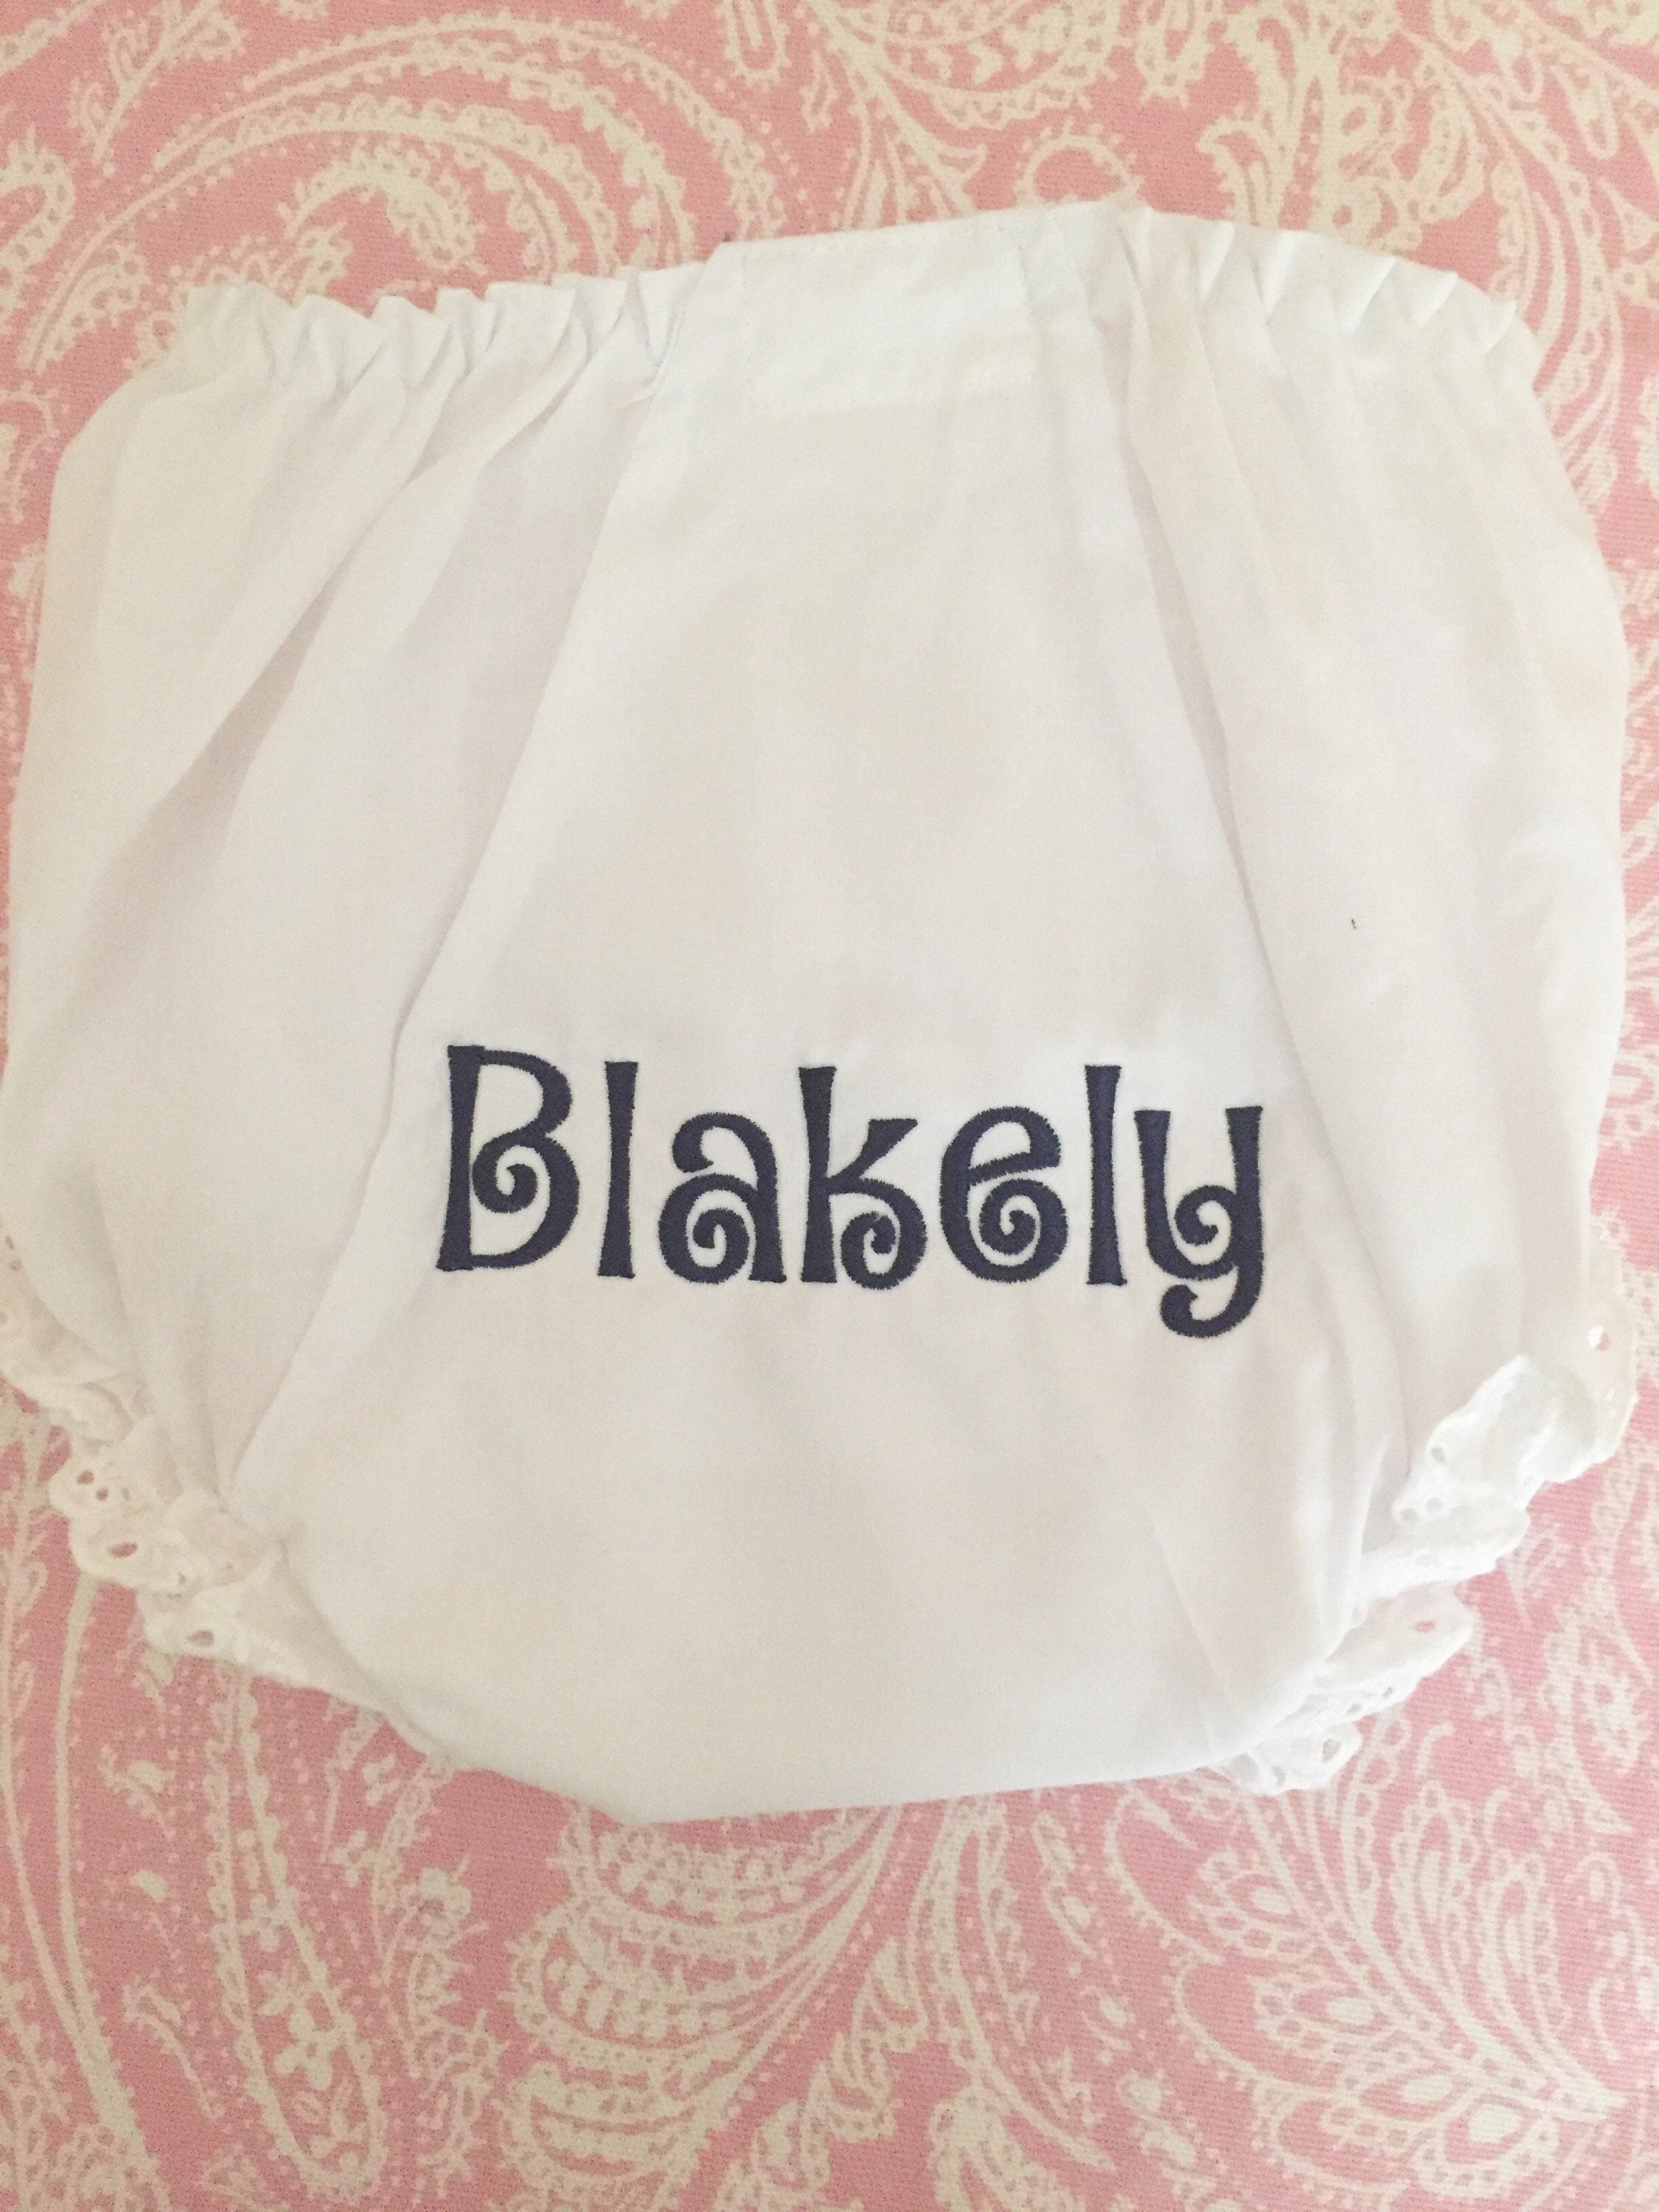 Personalized Monogrammed Diaper Covers Baby or Toddler Bloomers Several Designs 